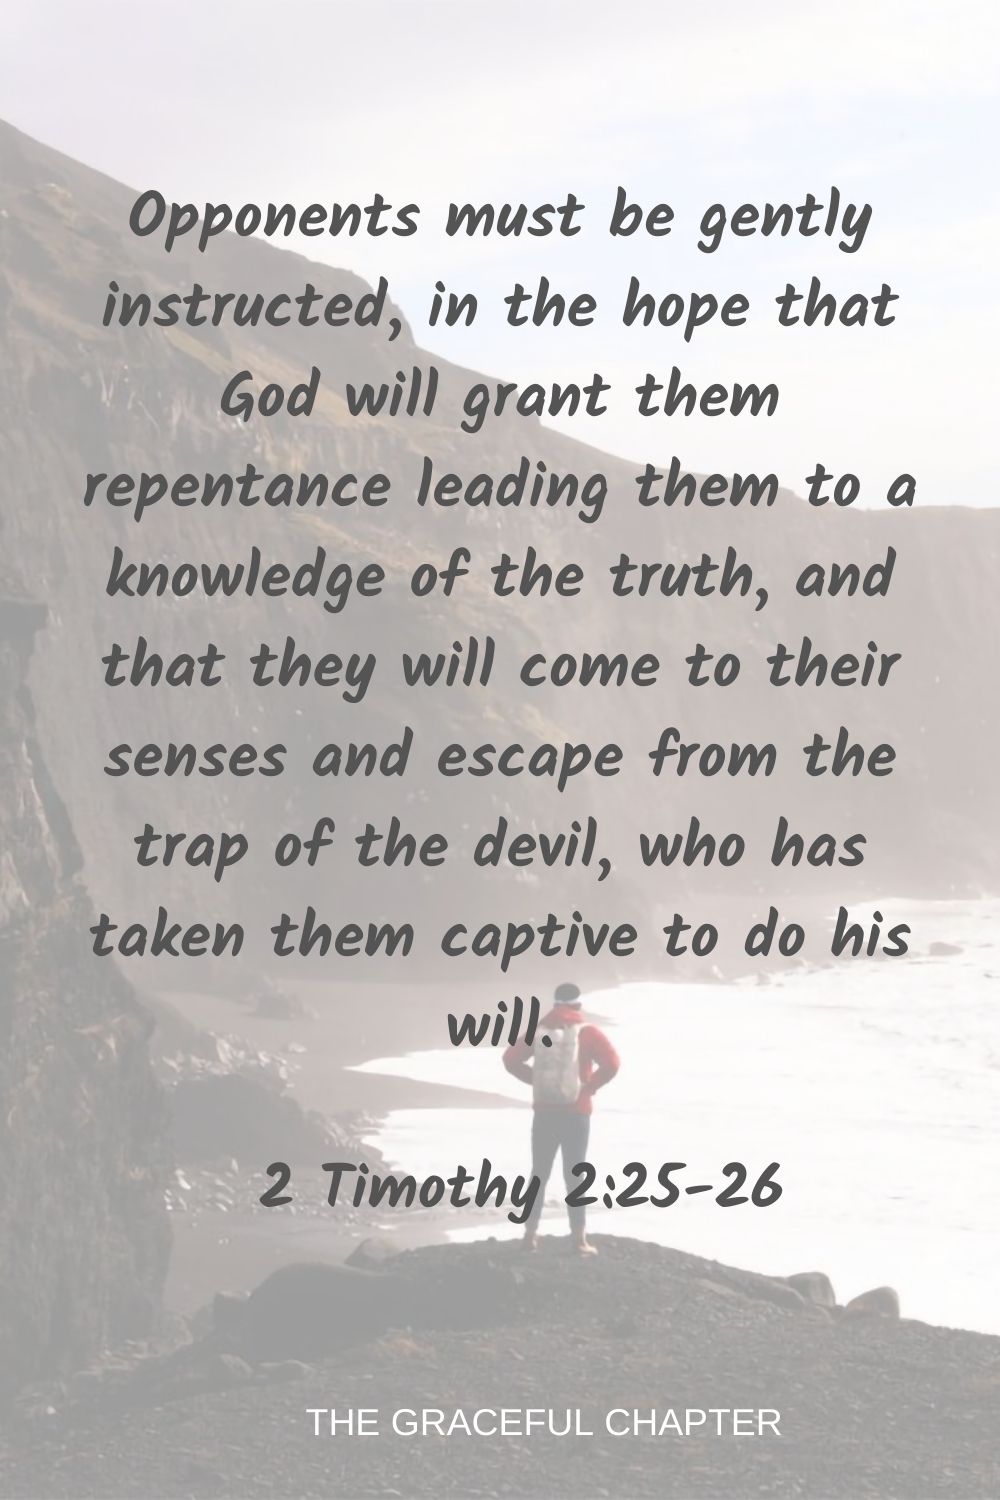 Opponents must be gently instructed, in the hope that God will grant them repentance leading them to a knowledge of the truth, and that they will come to their senses and escape from the trap of the devil, who has taken them captive to do his will. 2 Timothy 2:25-26